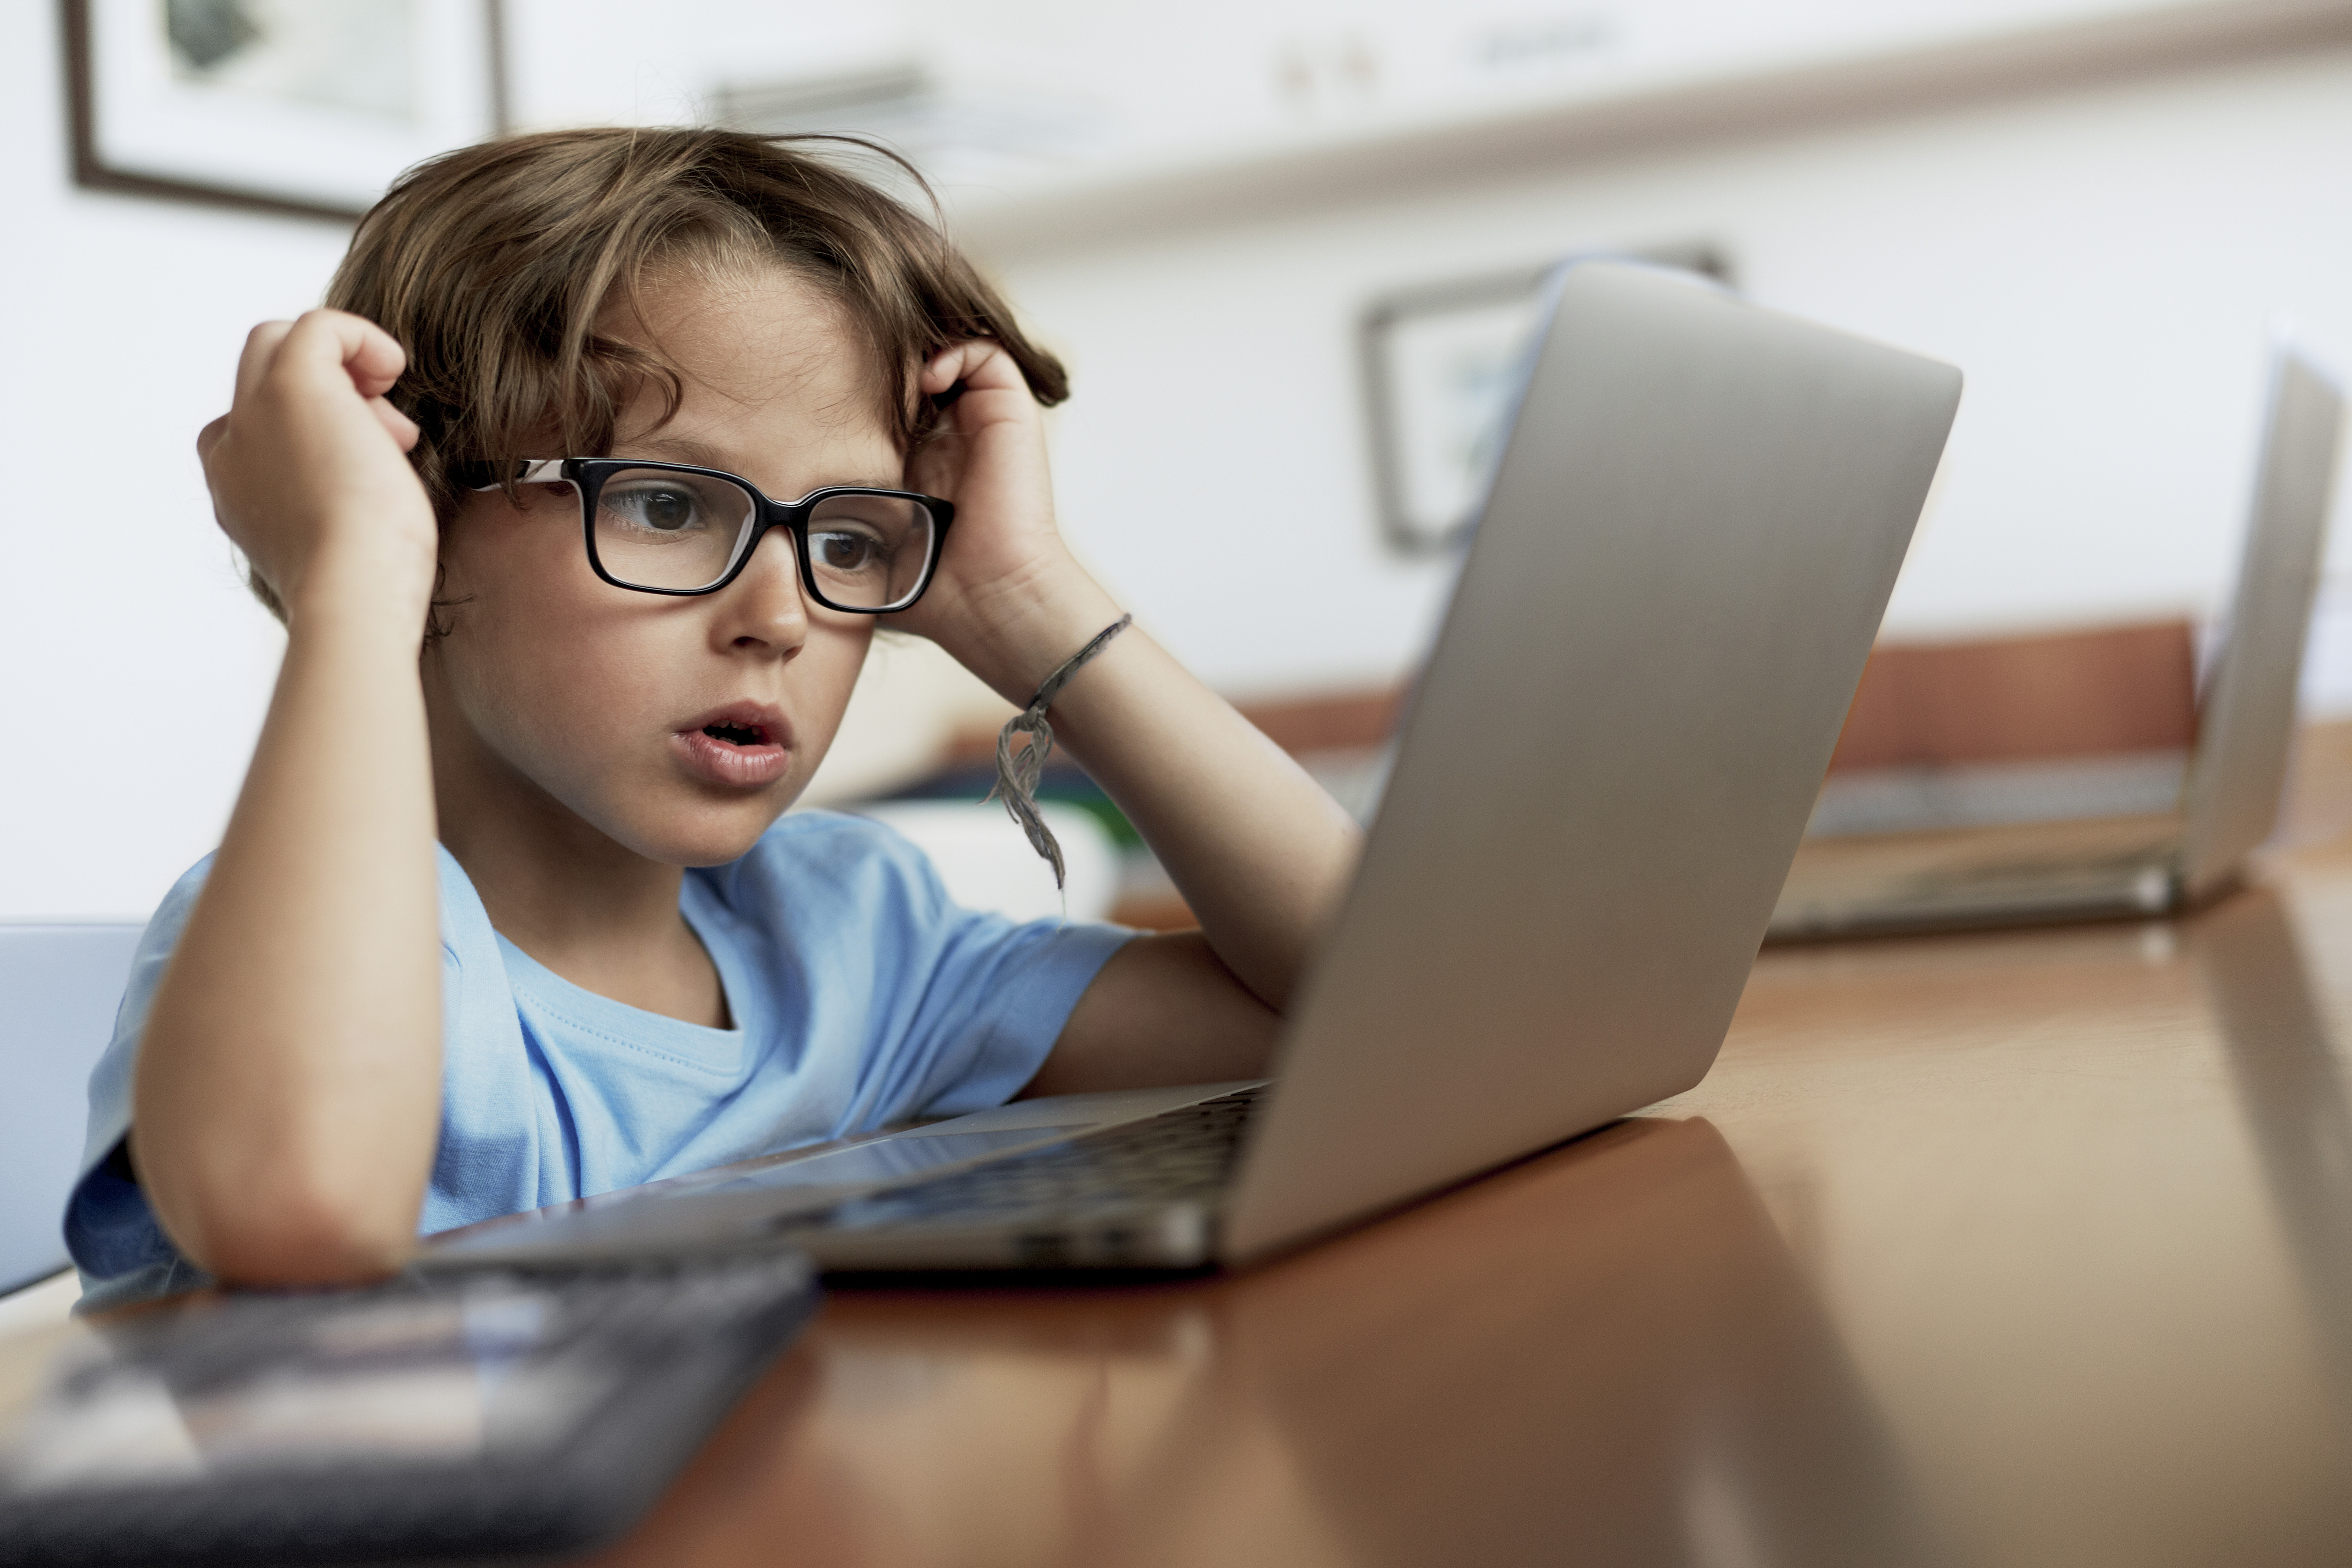 COVID restrictions and screens linked to myopia in children